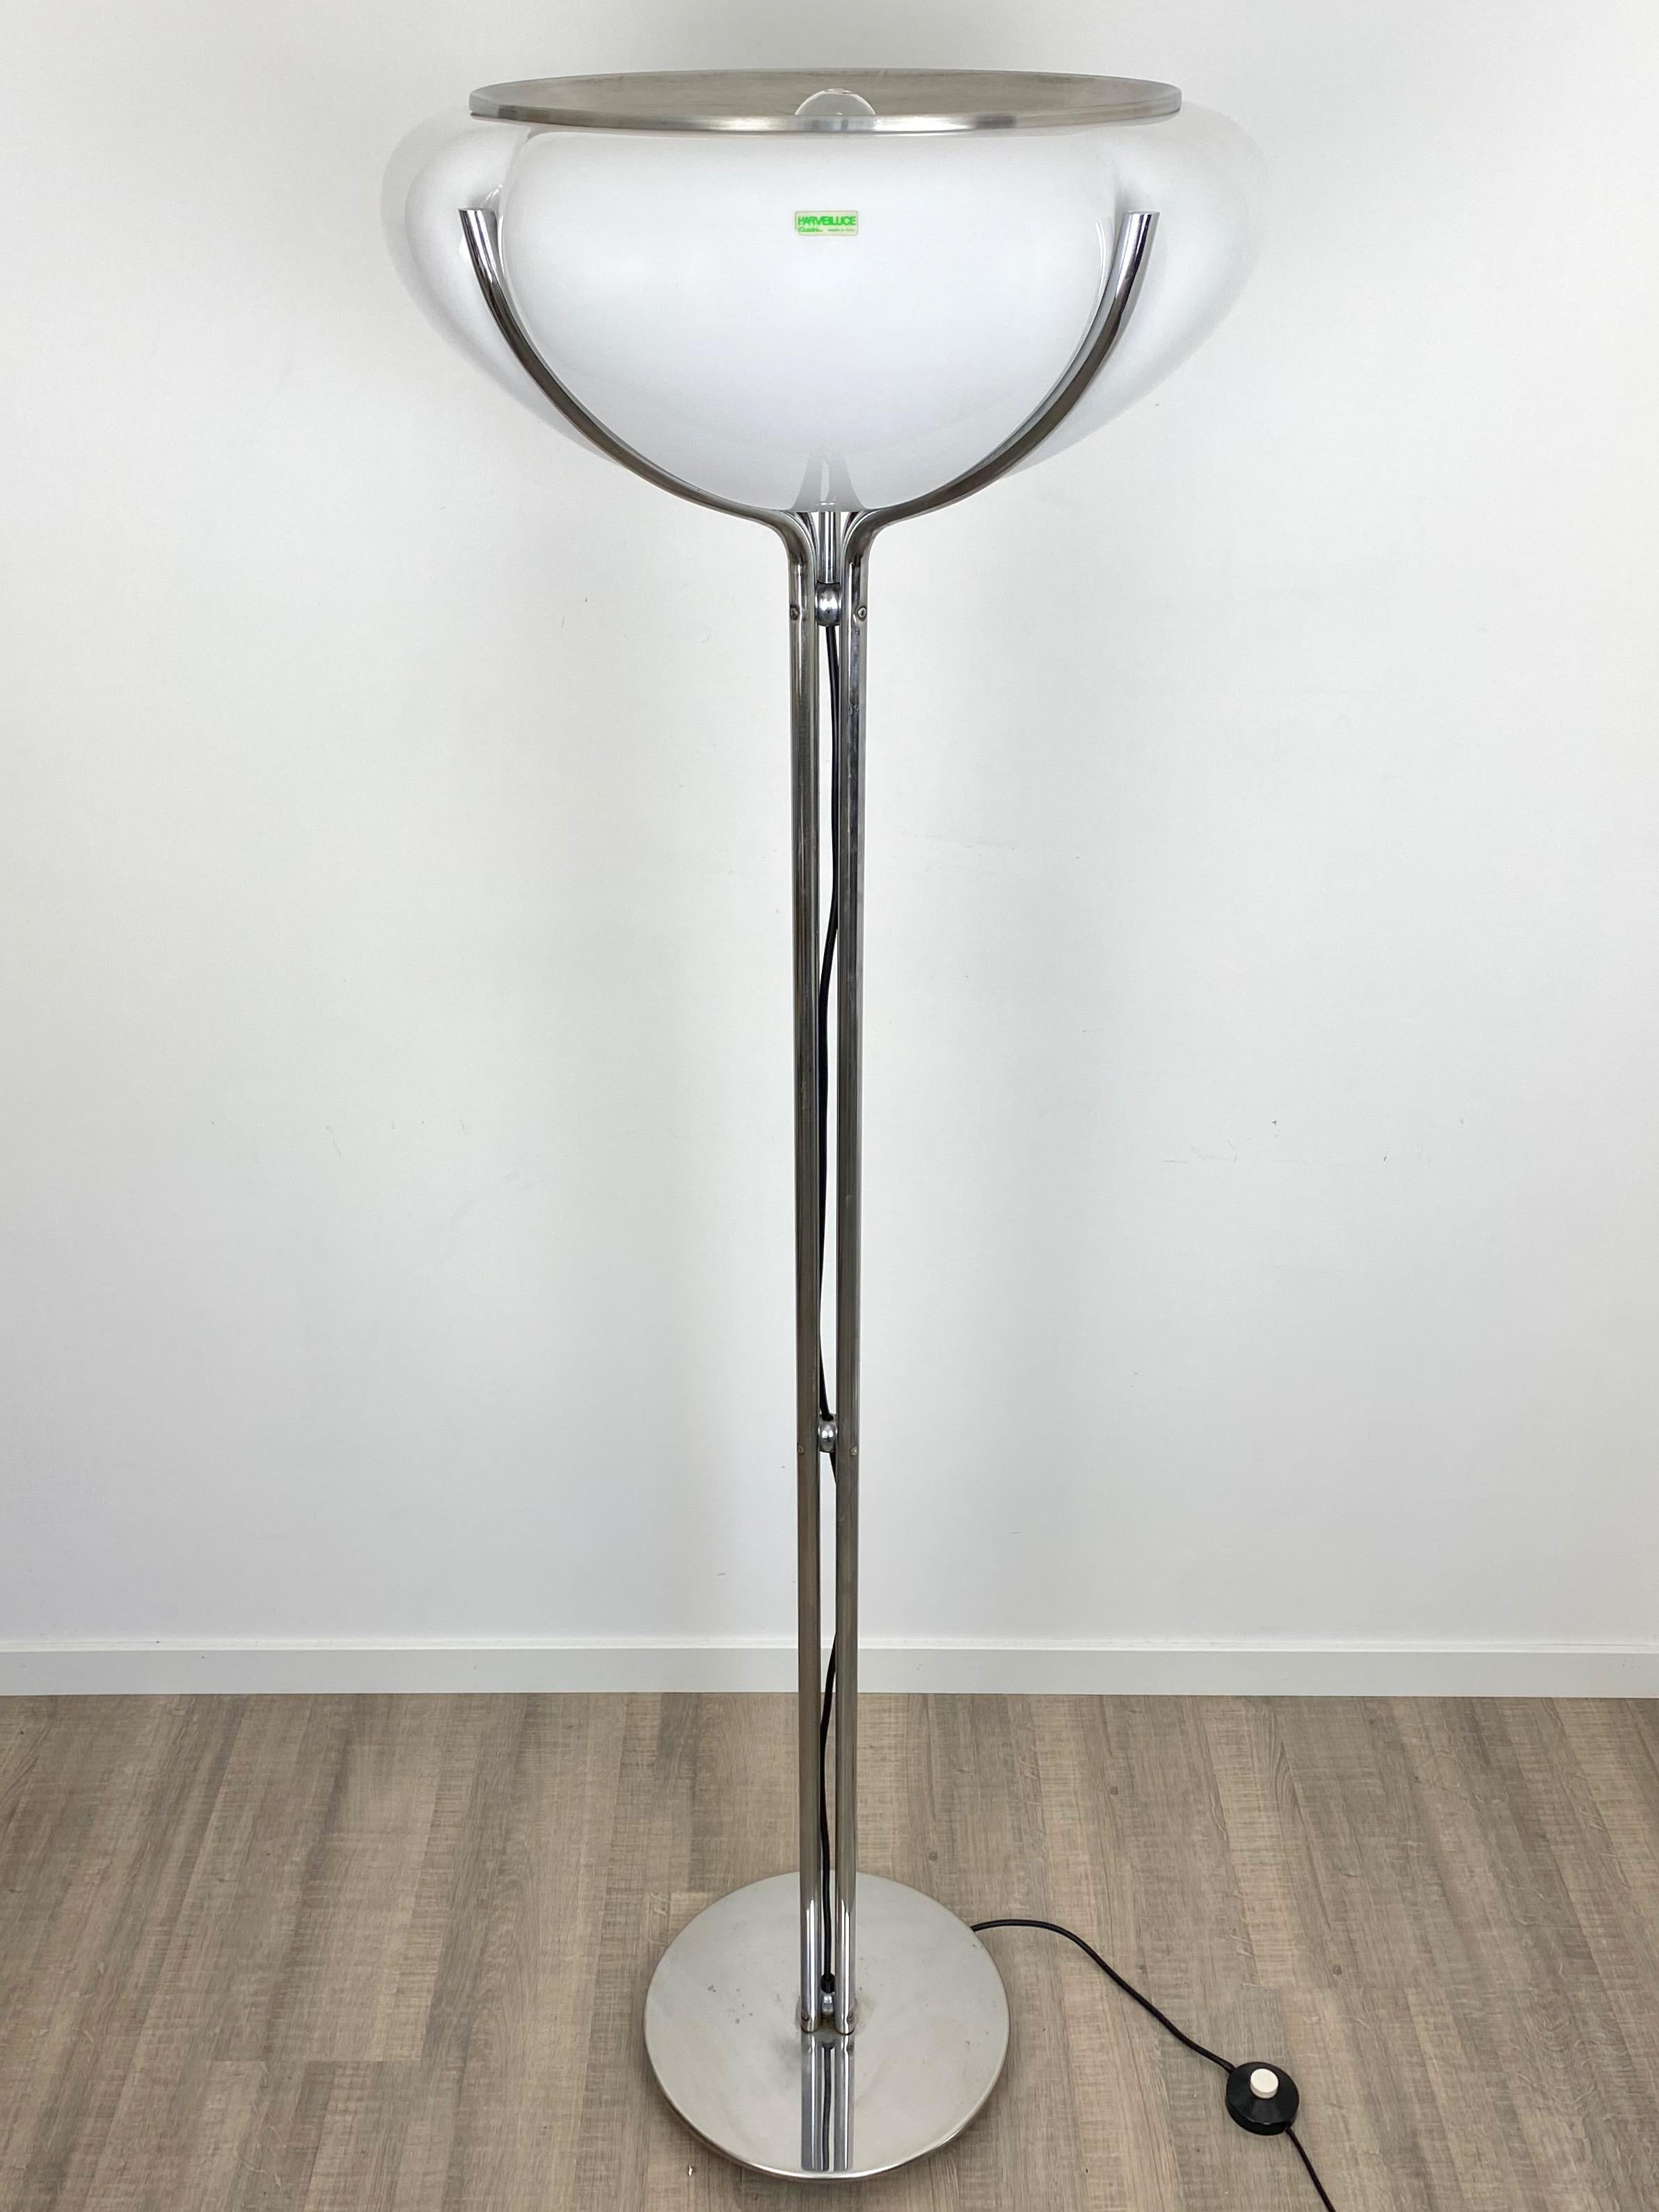 Quadrifoglio floor lamp designed by Gae Aulenti for Harvey Guzzini in 1974. Polished chrome circular base and four chrome stems support a molded white acrylic four leaf clover shaped shade. The floor lamp has two-light sources and works on a pedal